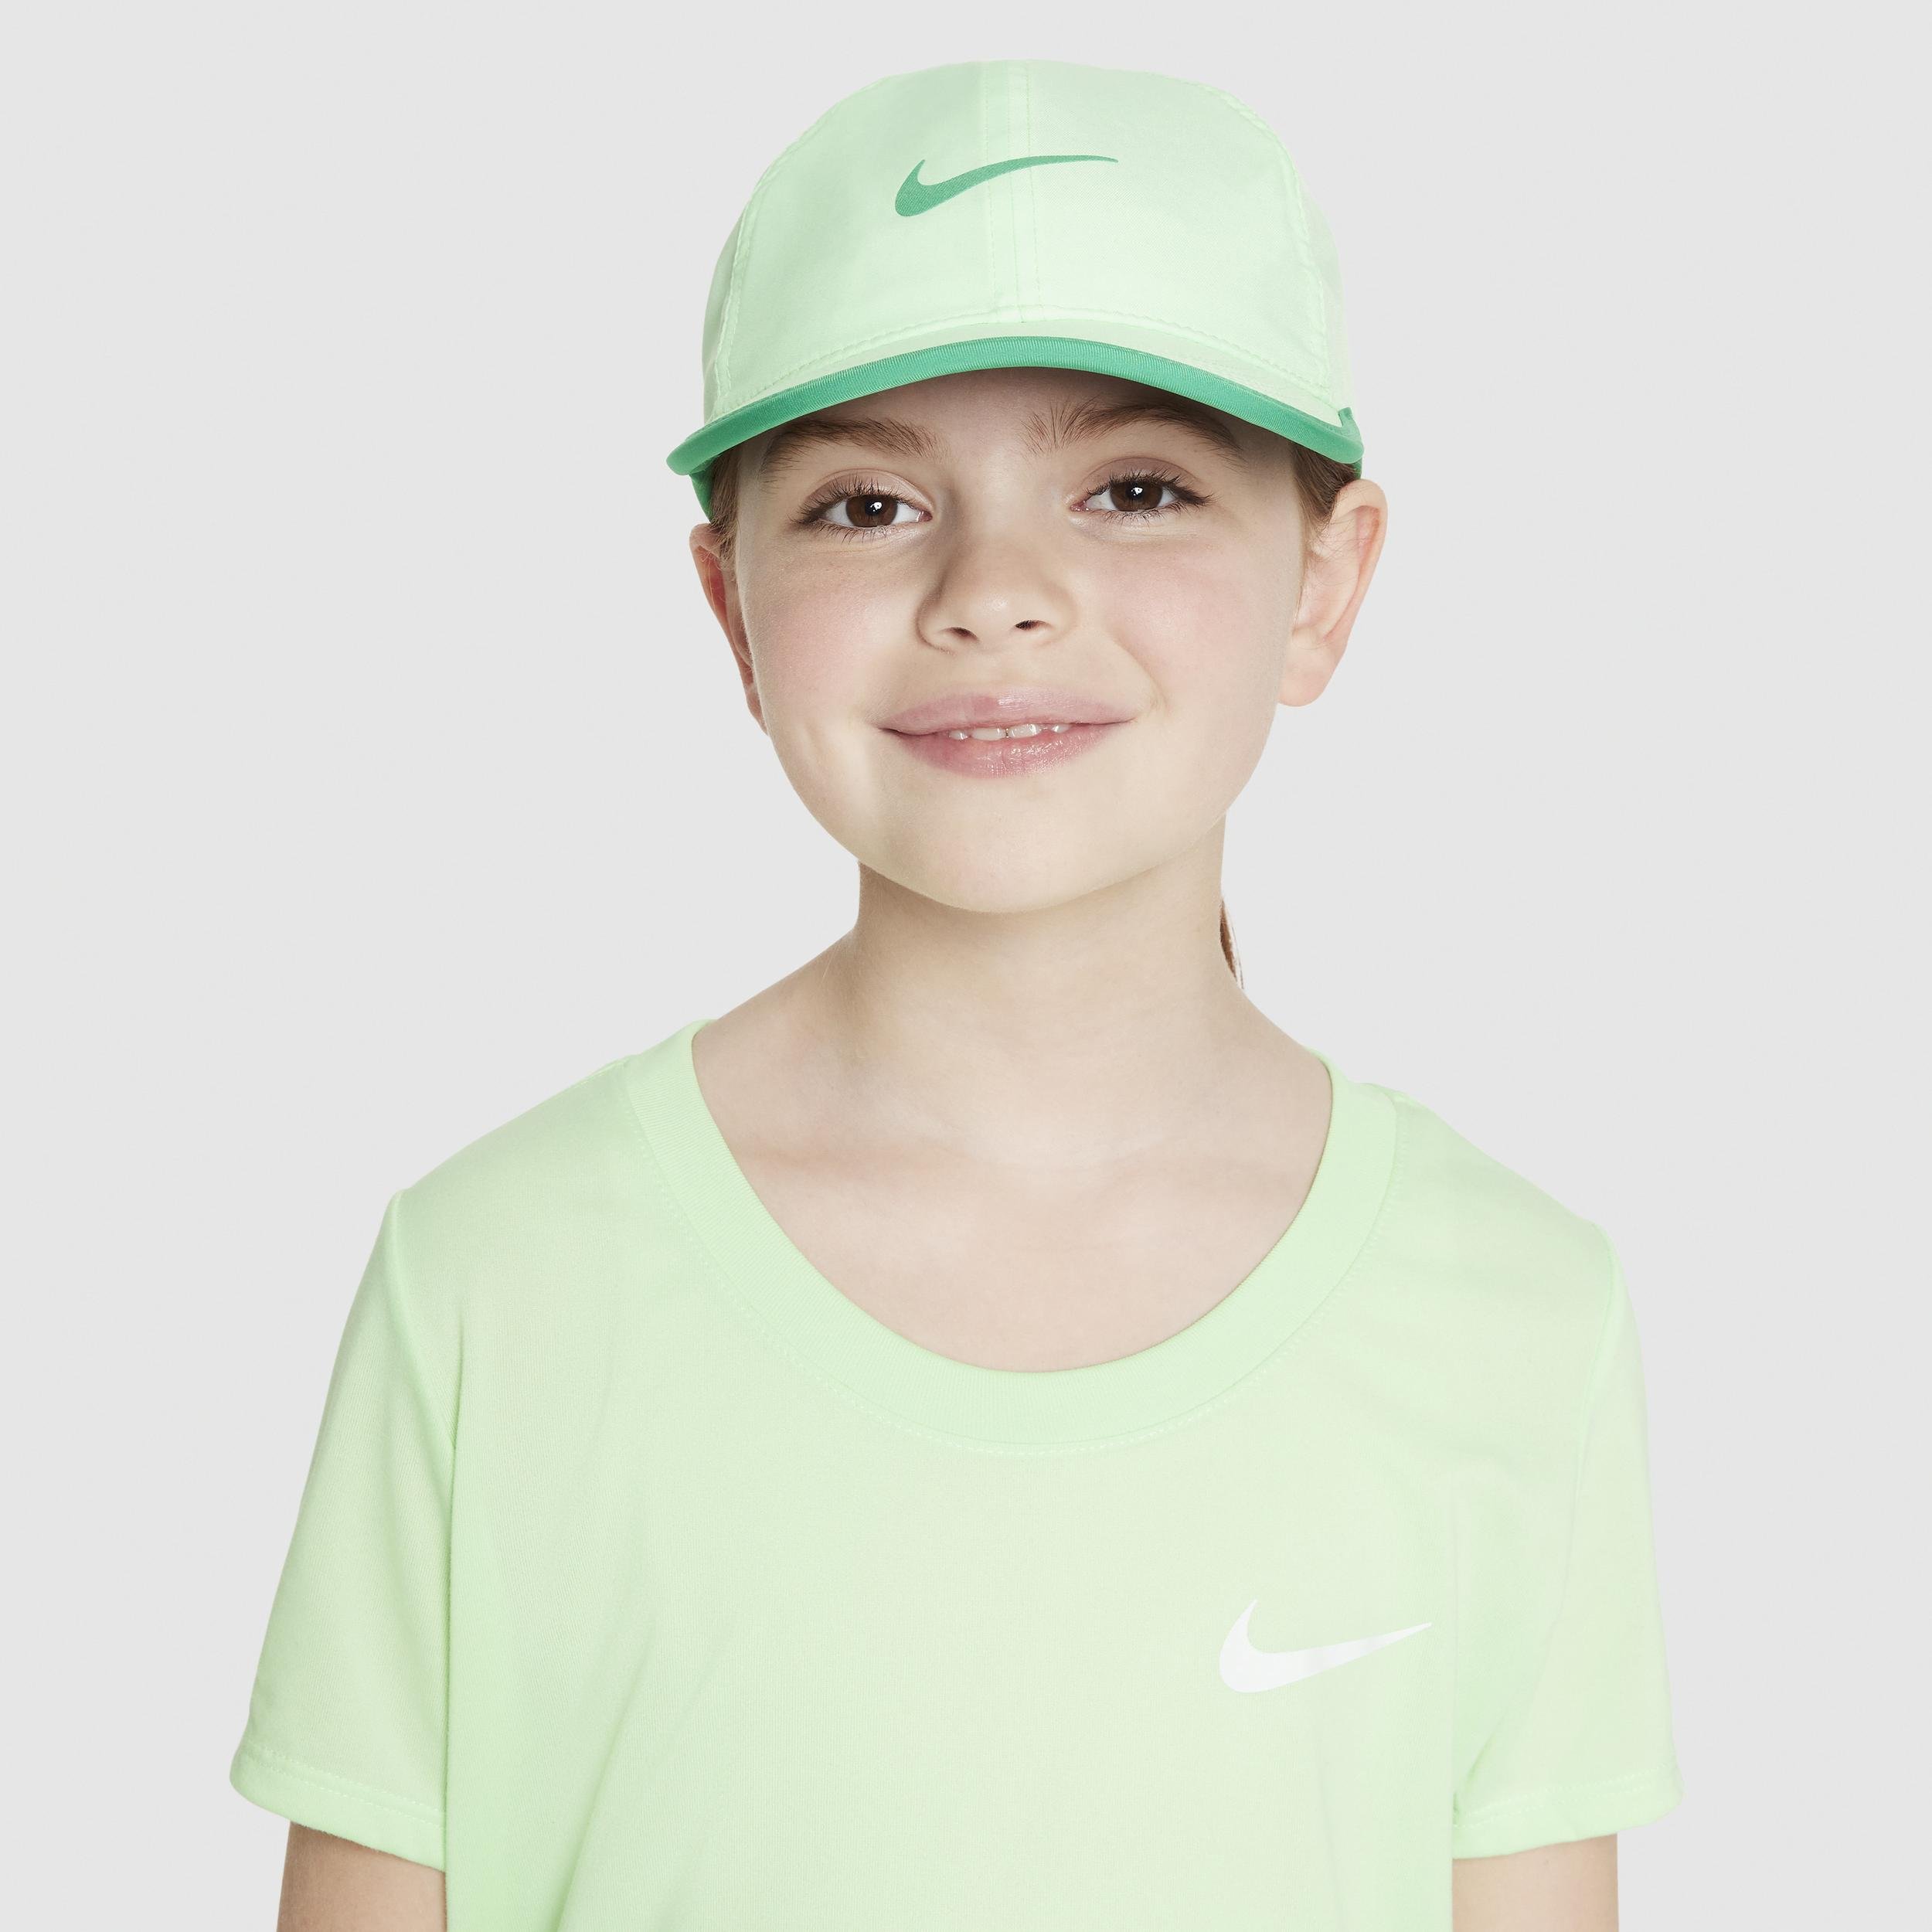 Nike Dri-FIT Club Kids' Unstructured Featherlight Cap by NIKE